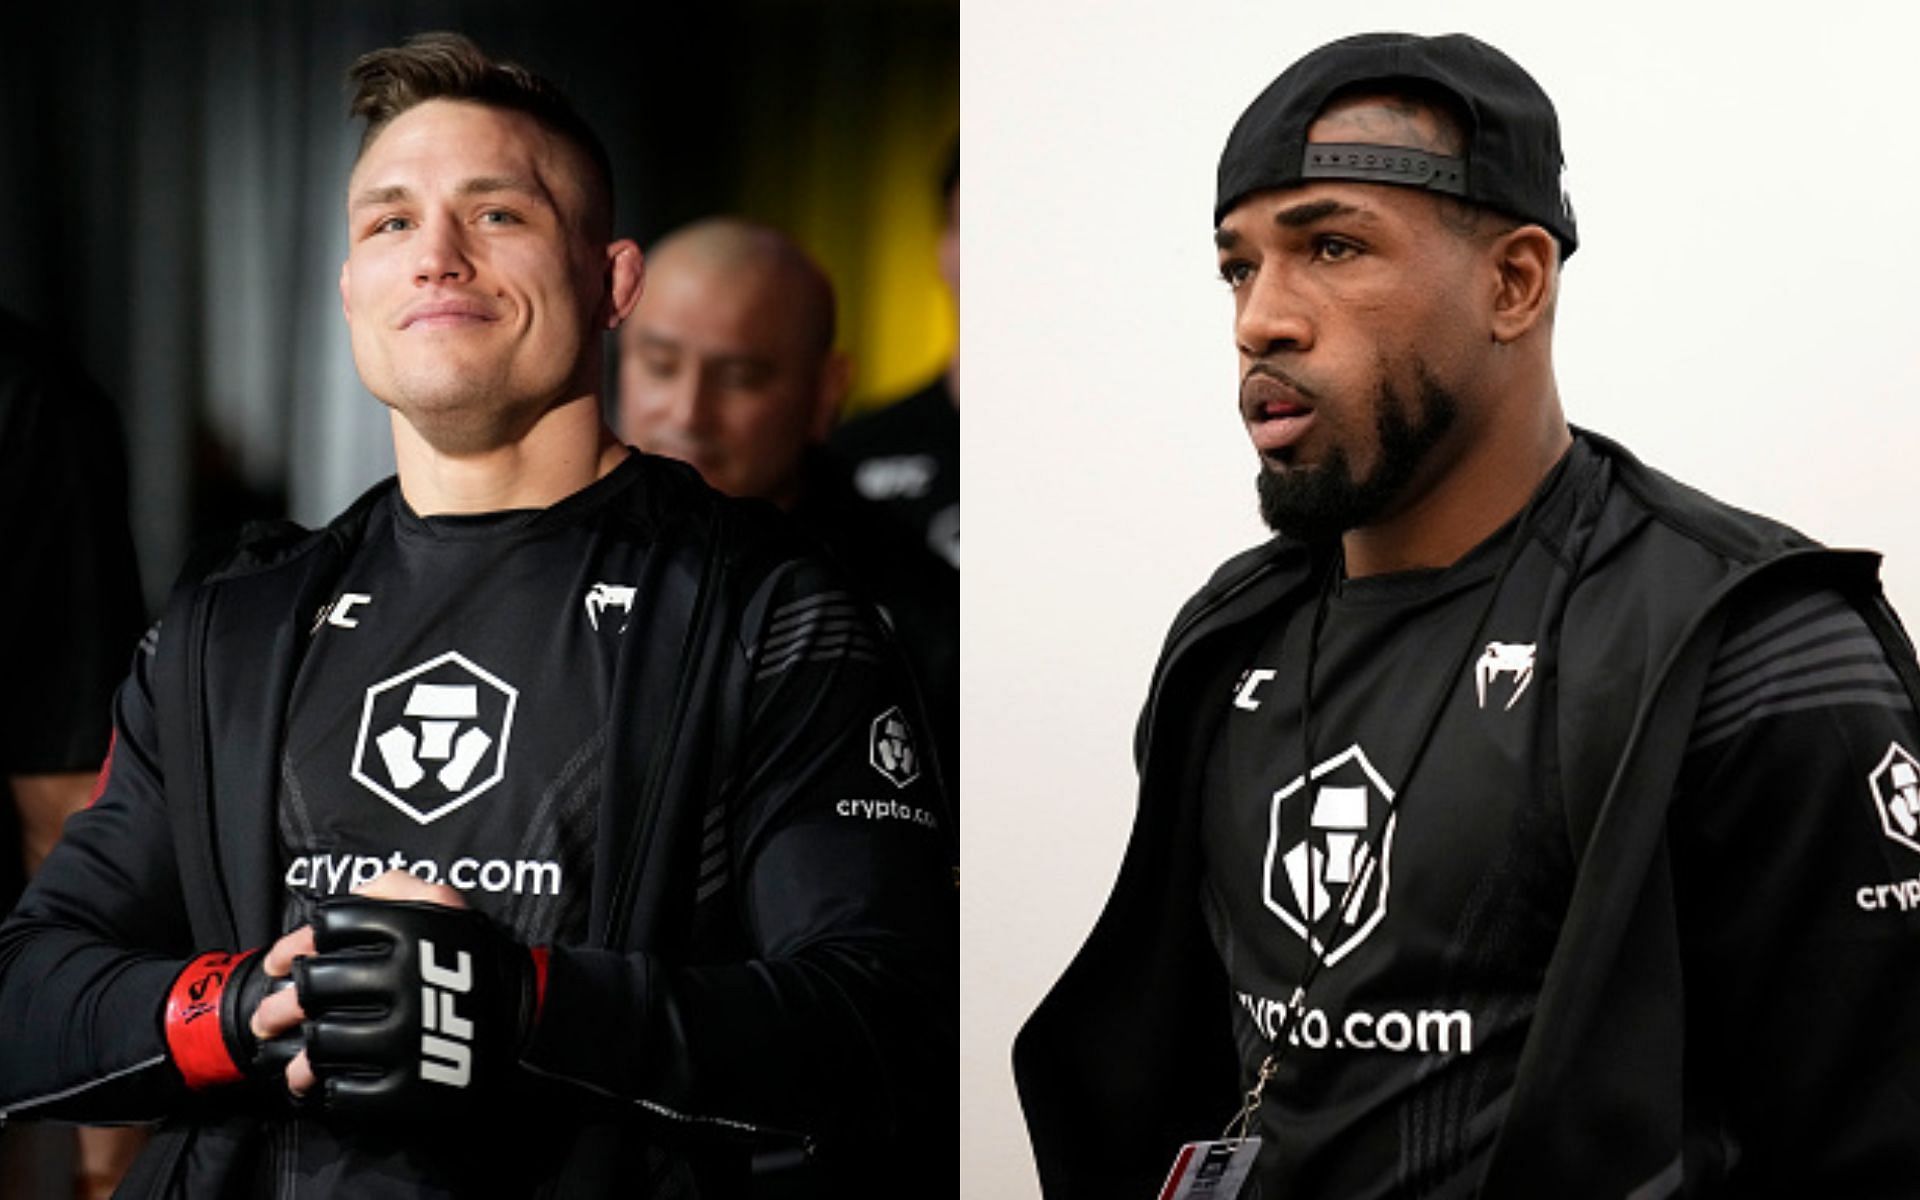 Drew Dober (Left) and Bobby Green (Right)(Images via Getty)